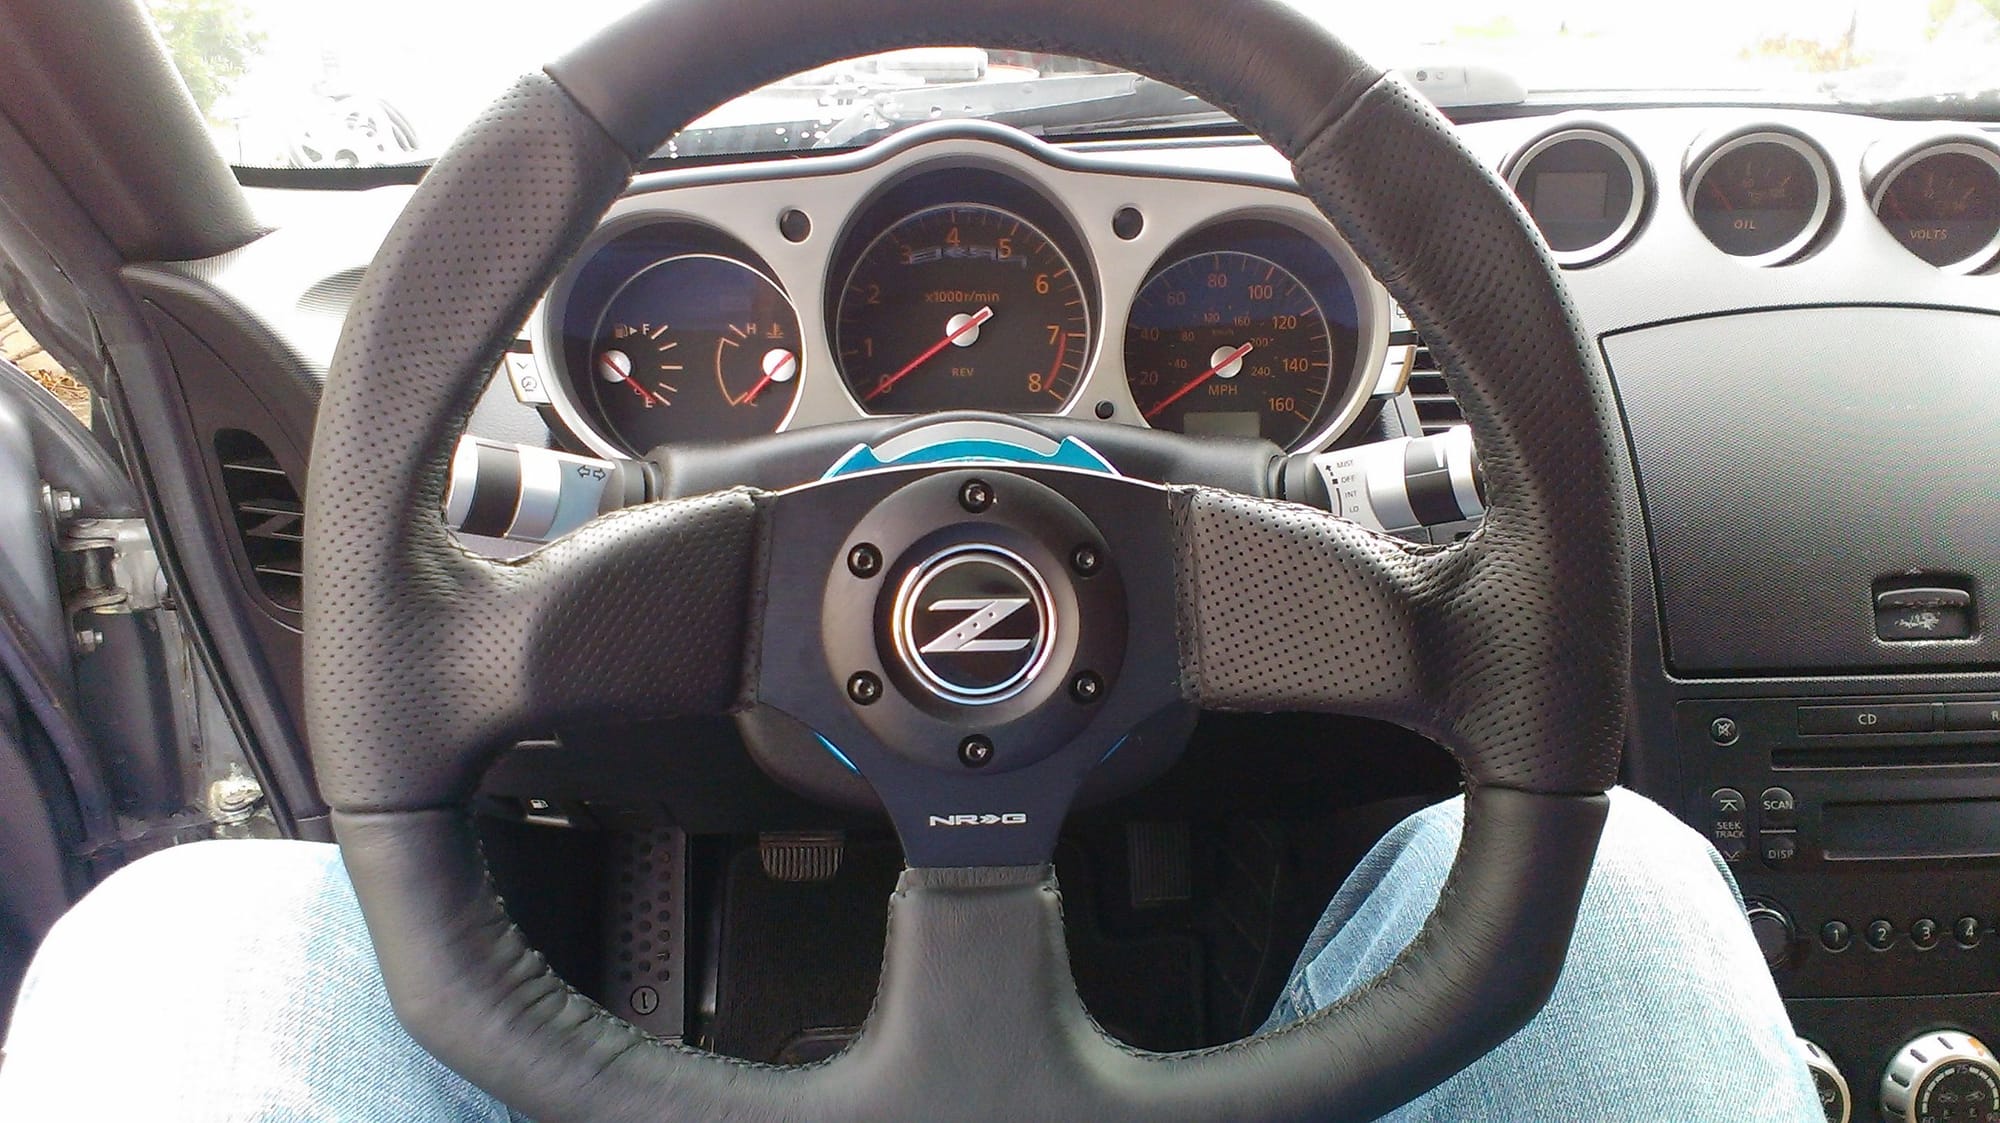 Nrg steering wheel. - MY350Z.COM - Nissan 350Z and 370Z Forum Discussion